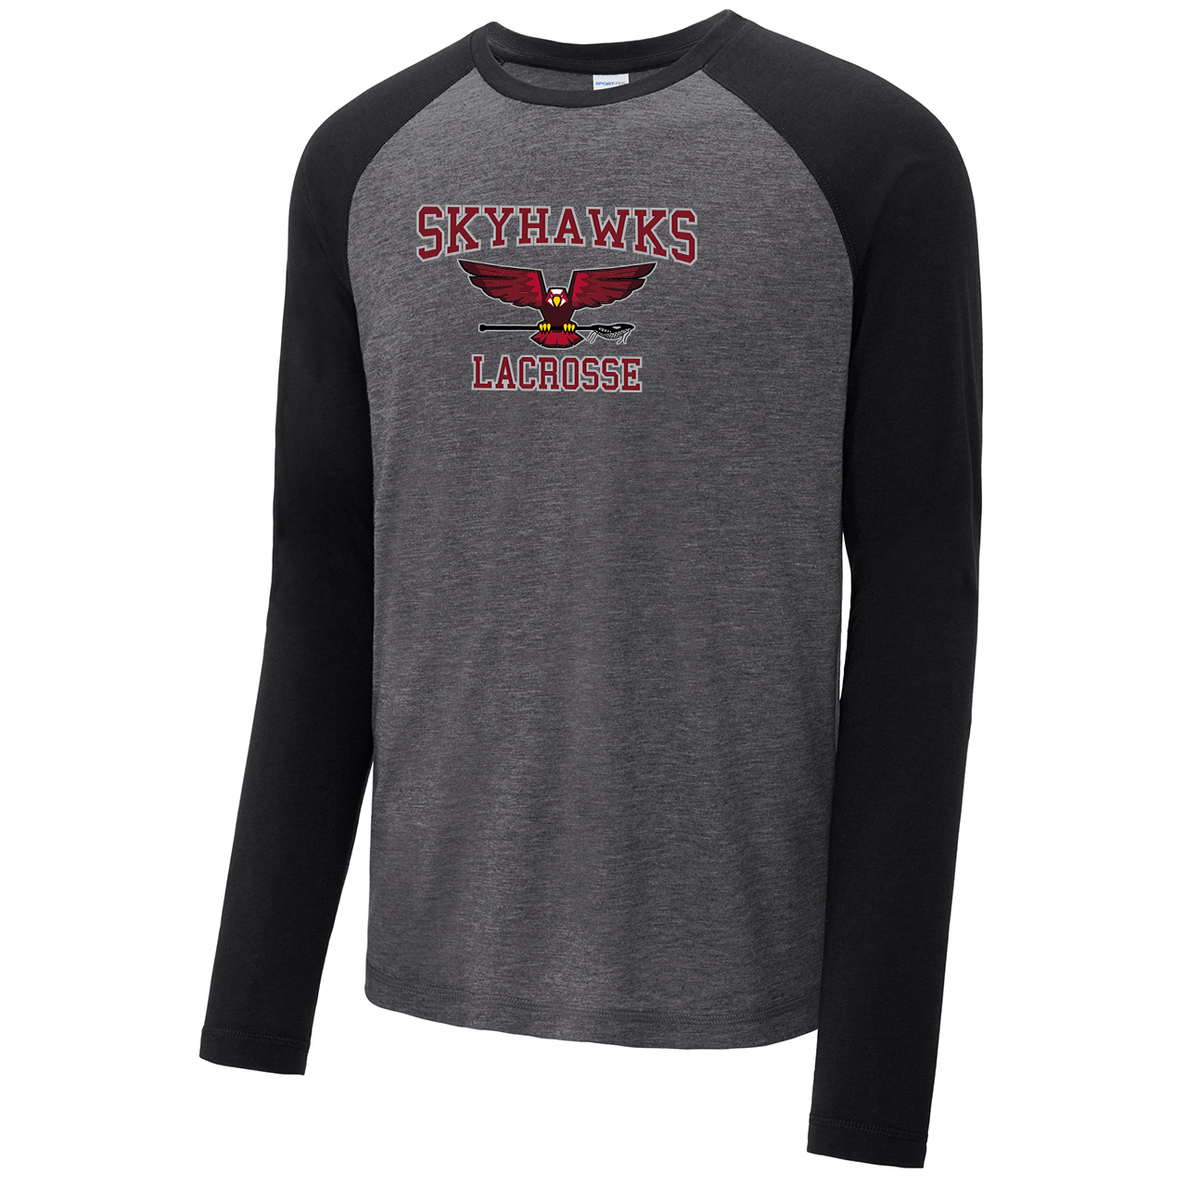 North Tapps Legacy Lacrosse Long Sleeve Raglan CottonTouch